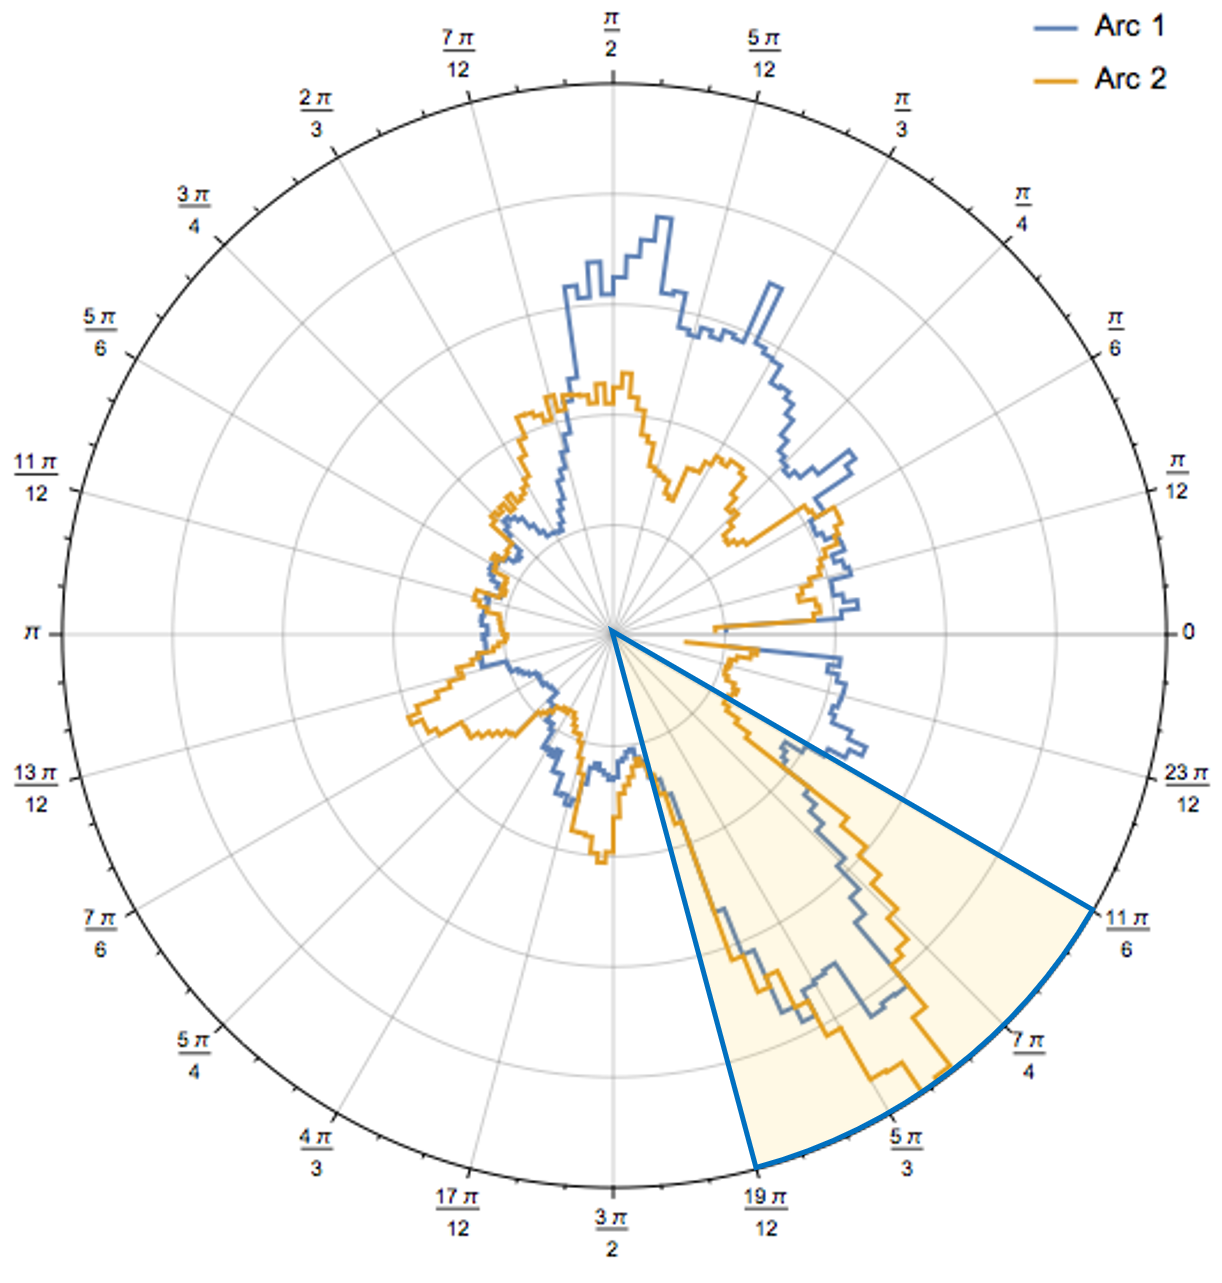 Polar plot of complexity (circumference/area) as a function of gantry angle in a patient with locally advanced prostate cancer. The shaded part of the arcs is associated with a high degree of complexity, rendering the plan vulnerable to spatio-temporal uncertainties (e.g., intrafraction prostate motion). Source: Radiation Oncology Department of Papageorgiou General Hospital.